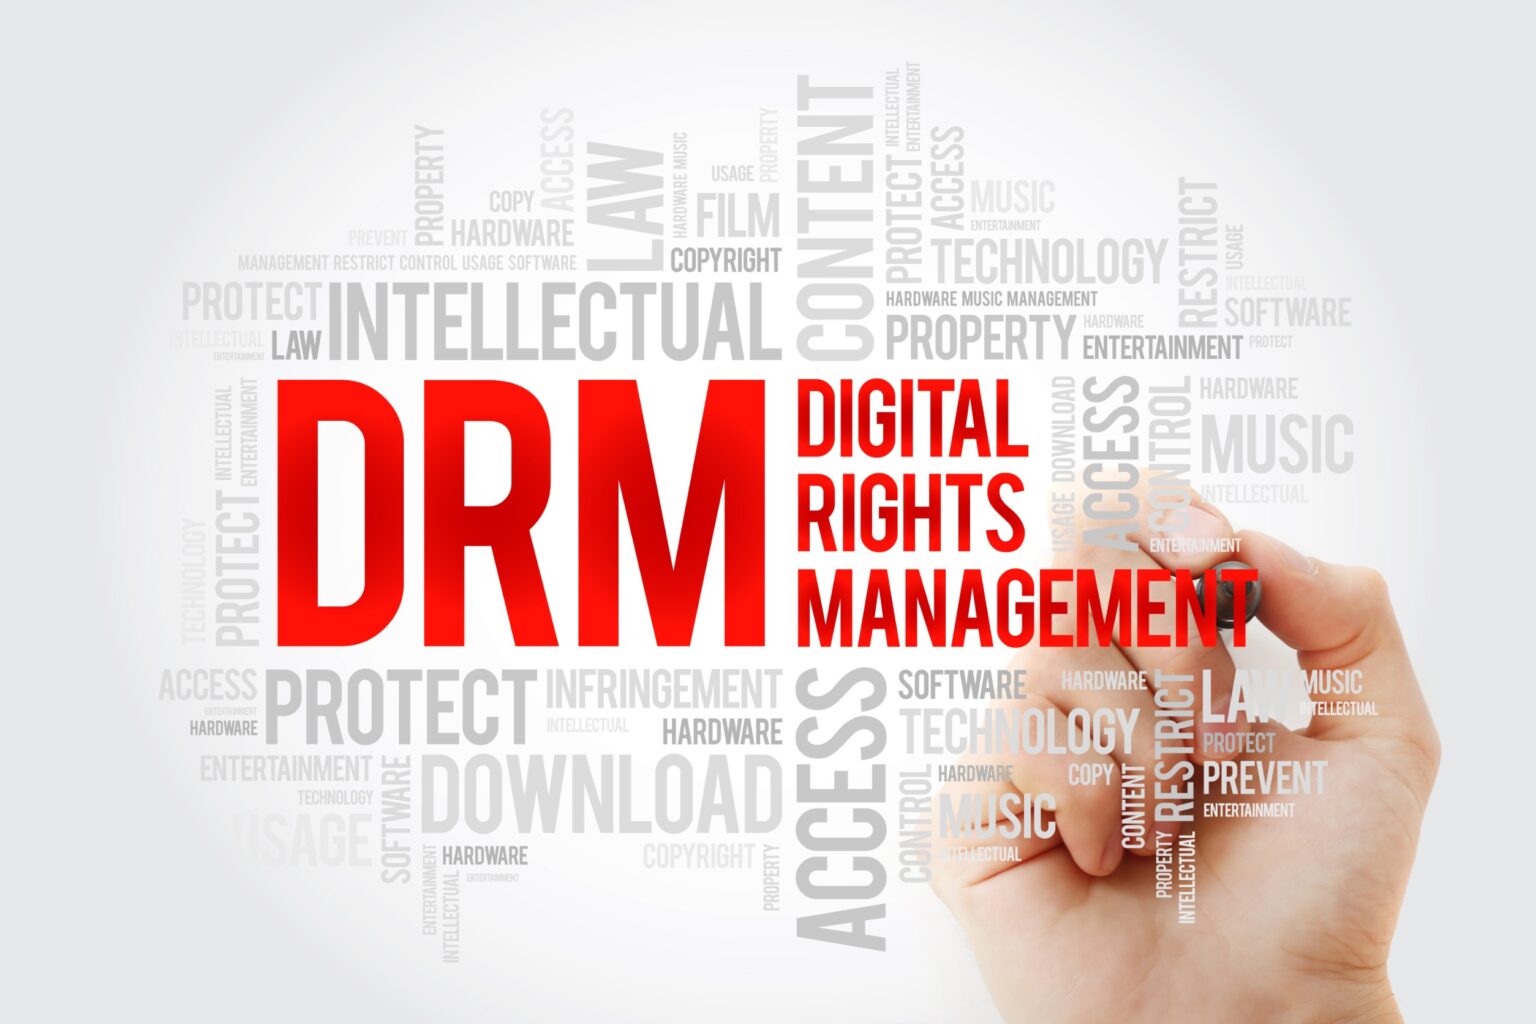 Right manager. Digital rights Management. Digital rights. What is Digital rights. Digital rights photo.